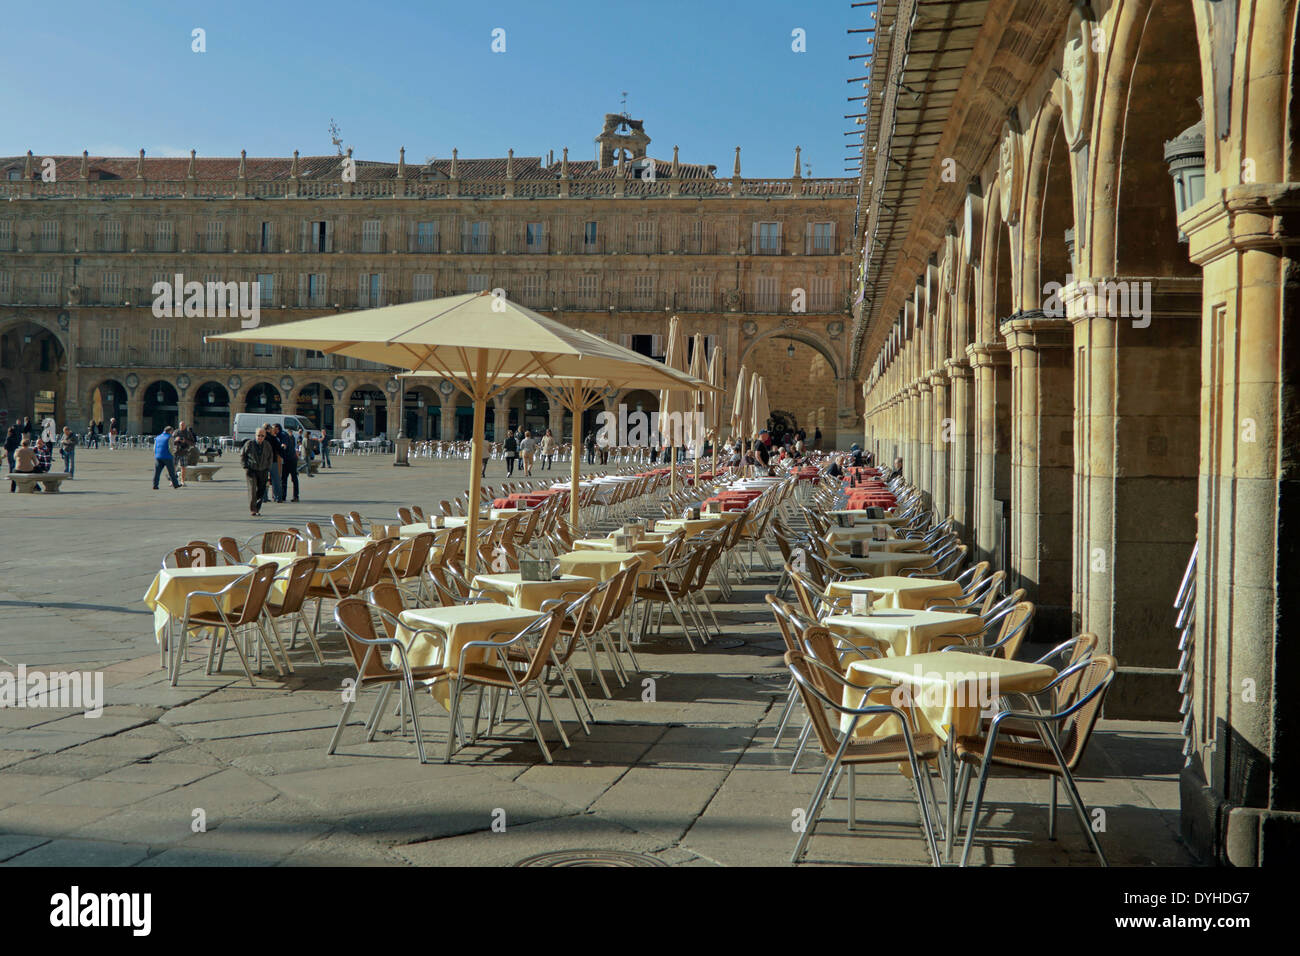 Salamanca, Castilla y León, Spain: The picturesque Plaza Mayor is typically bustling with activity. Stock Photo